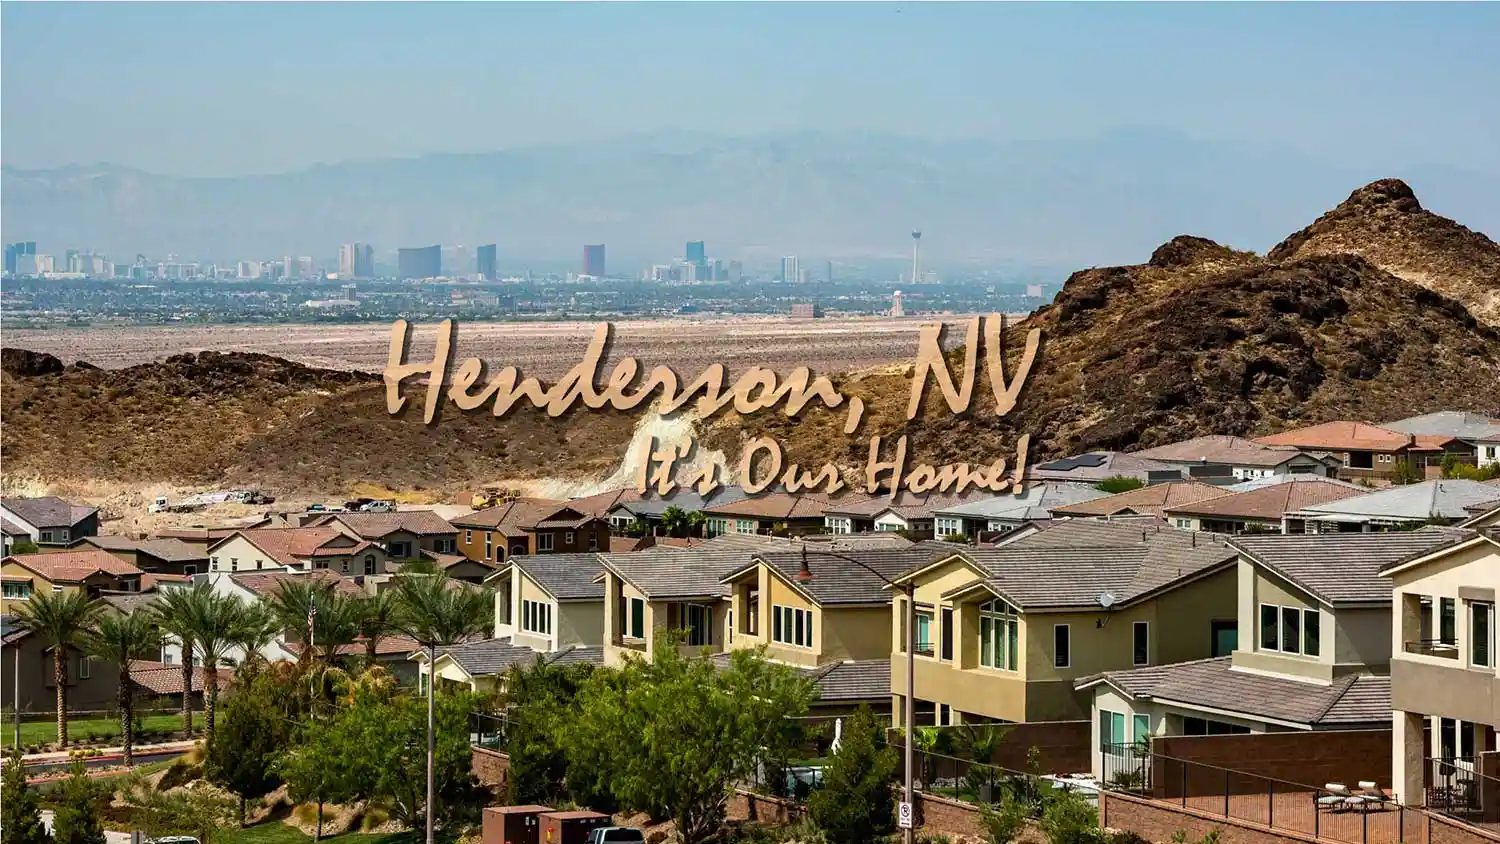 Henderson NV its where we live, work, and play.  This photo taken at a Lake Las Vegas community with complete views of the Las Vegas strip.